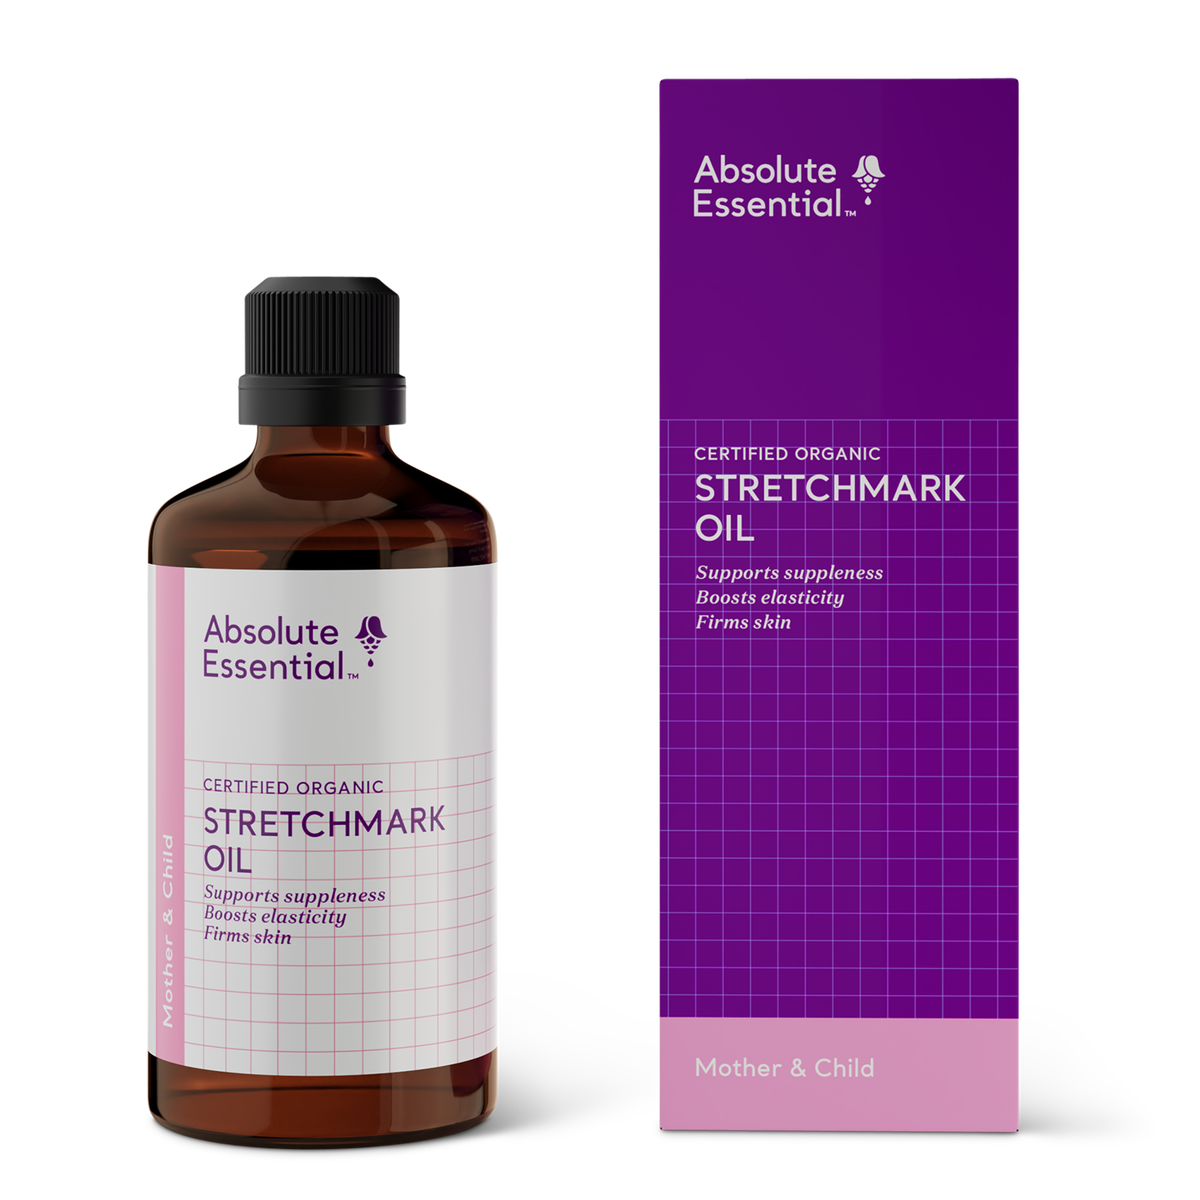 Absolute Essential Stretchmark Oil